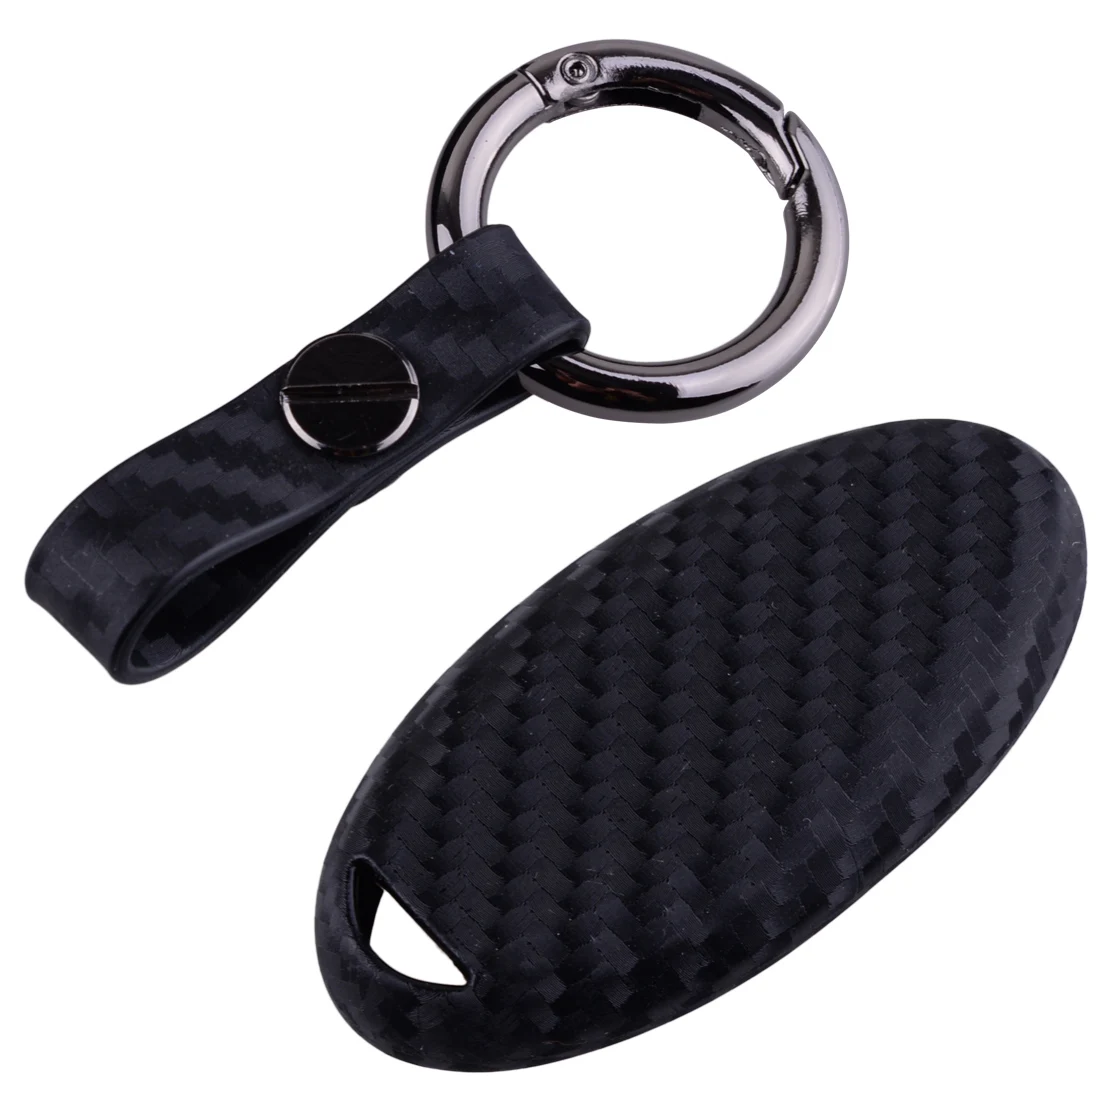 Carbon Fiber Look Smart Key Fob Case Silicone Cover w/Ring for Nissan Infiniti